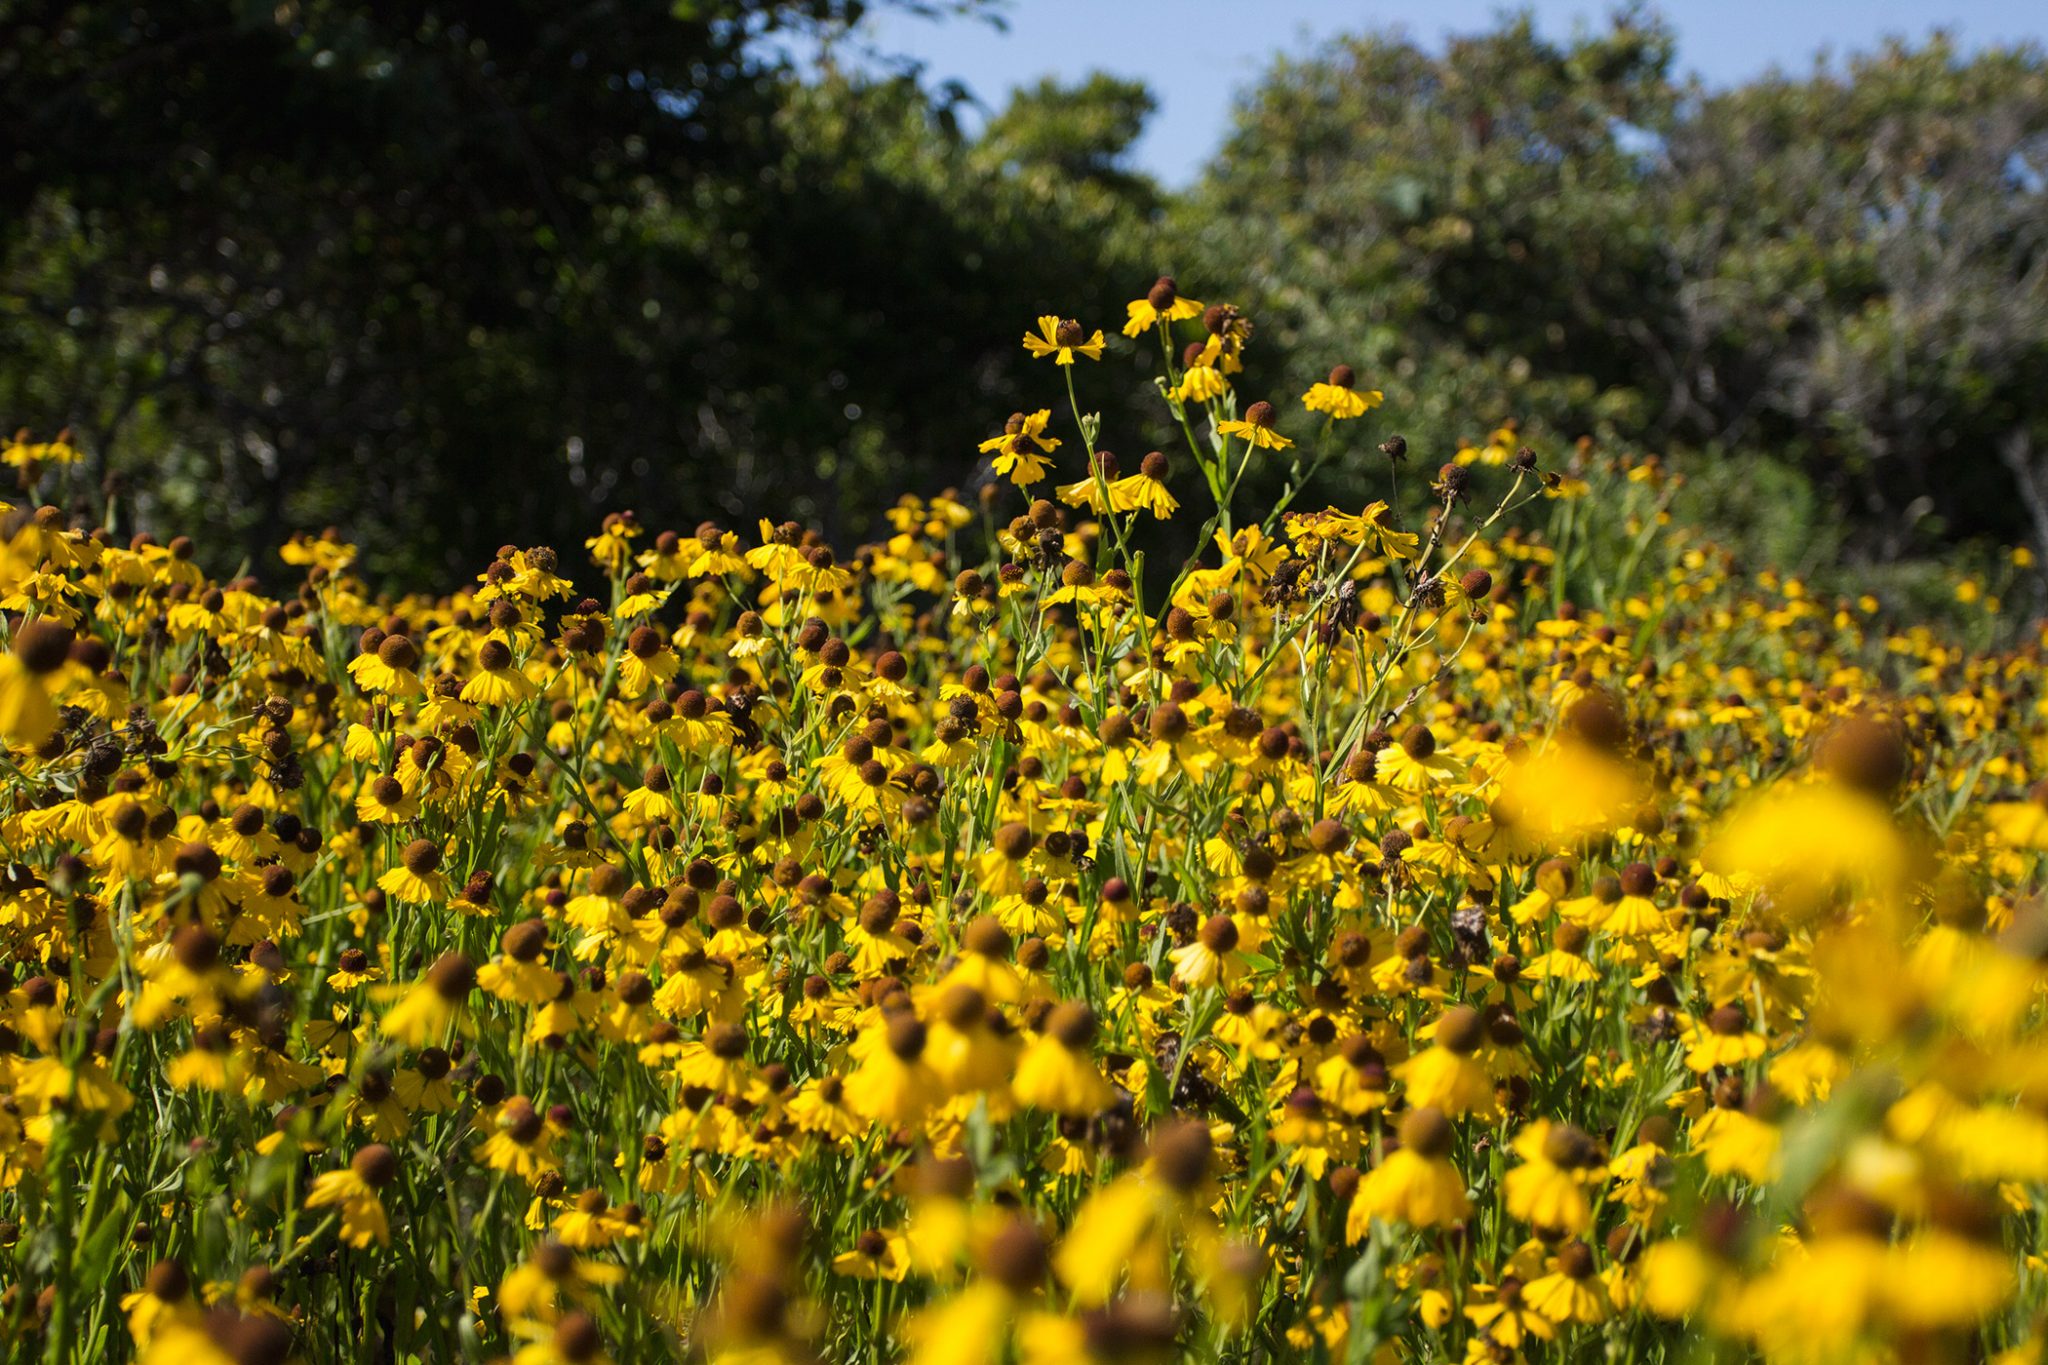 Wildflowers along the paths highlight the landscape. 